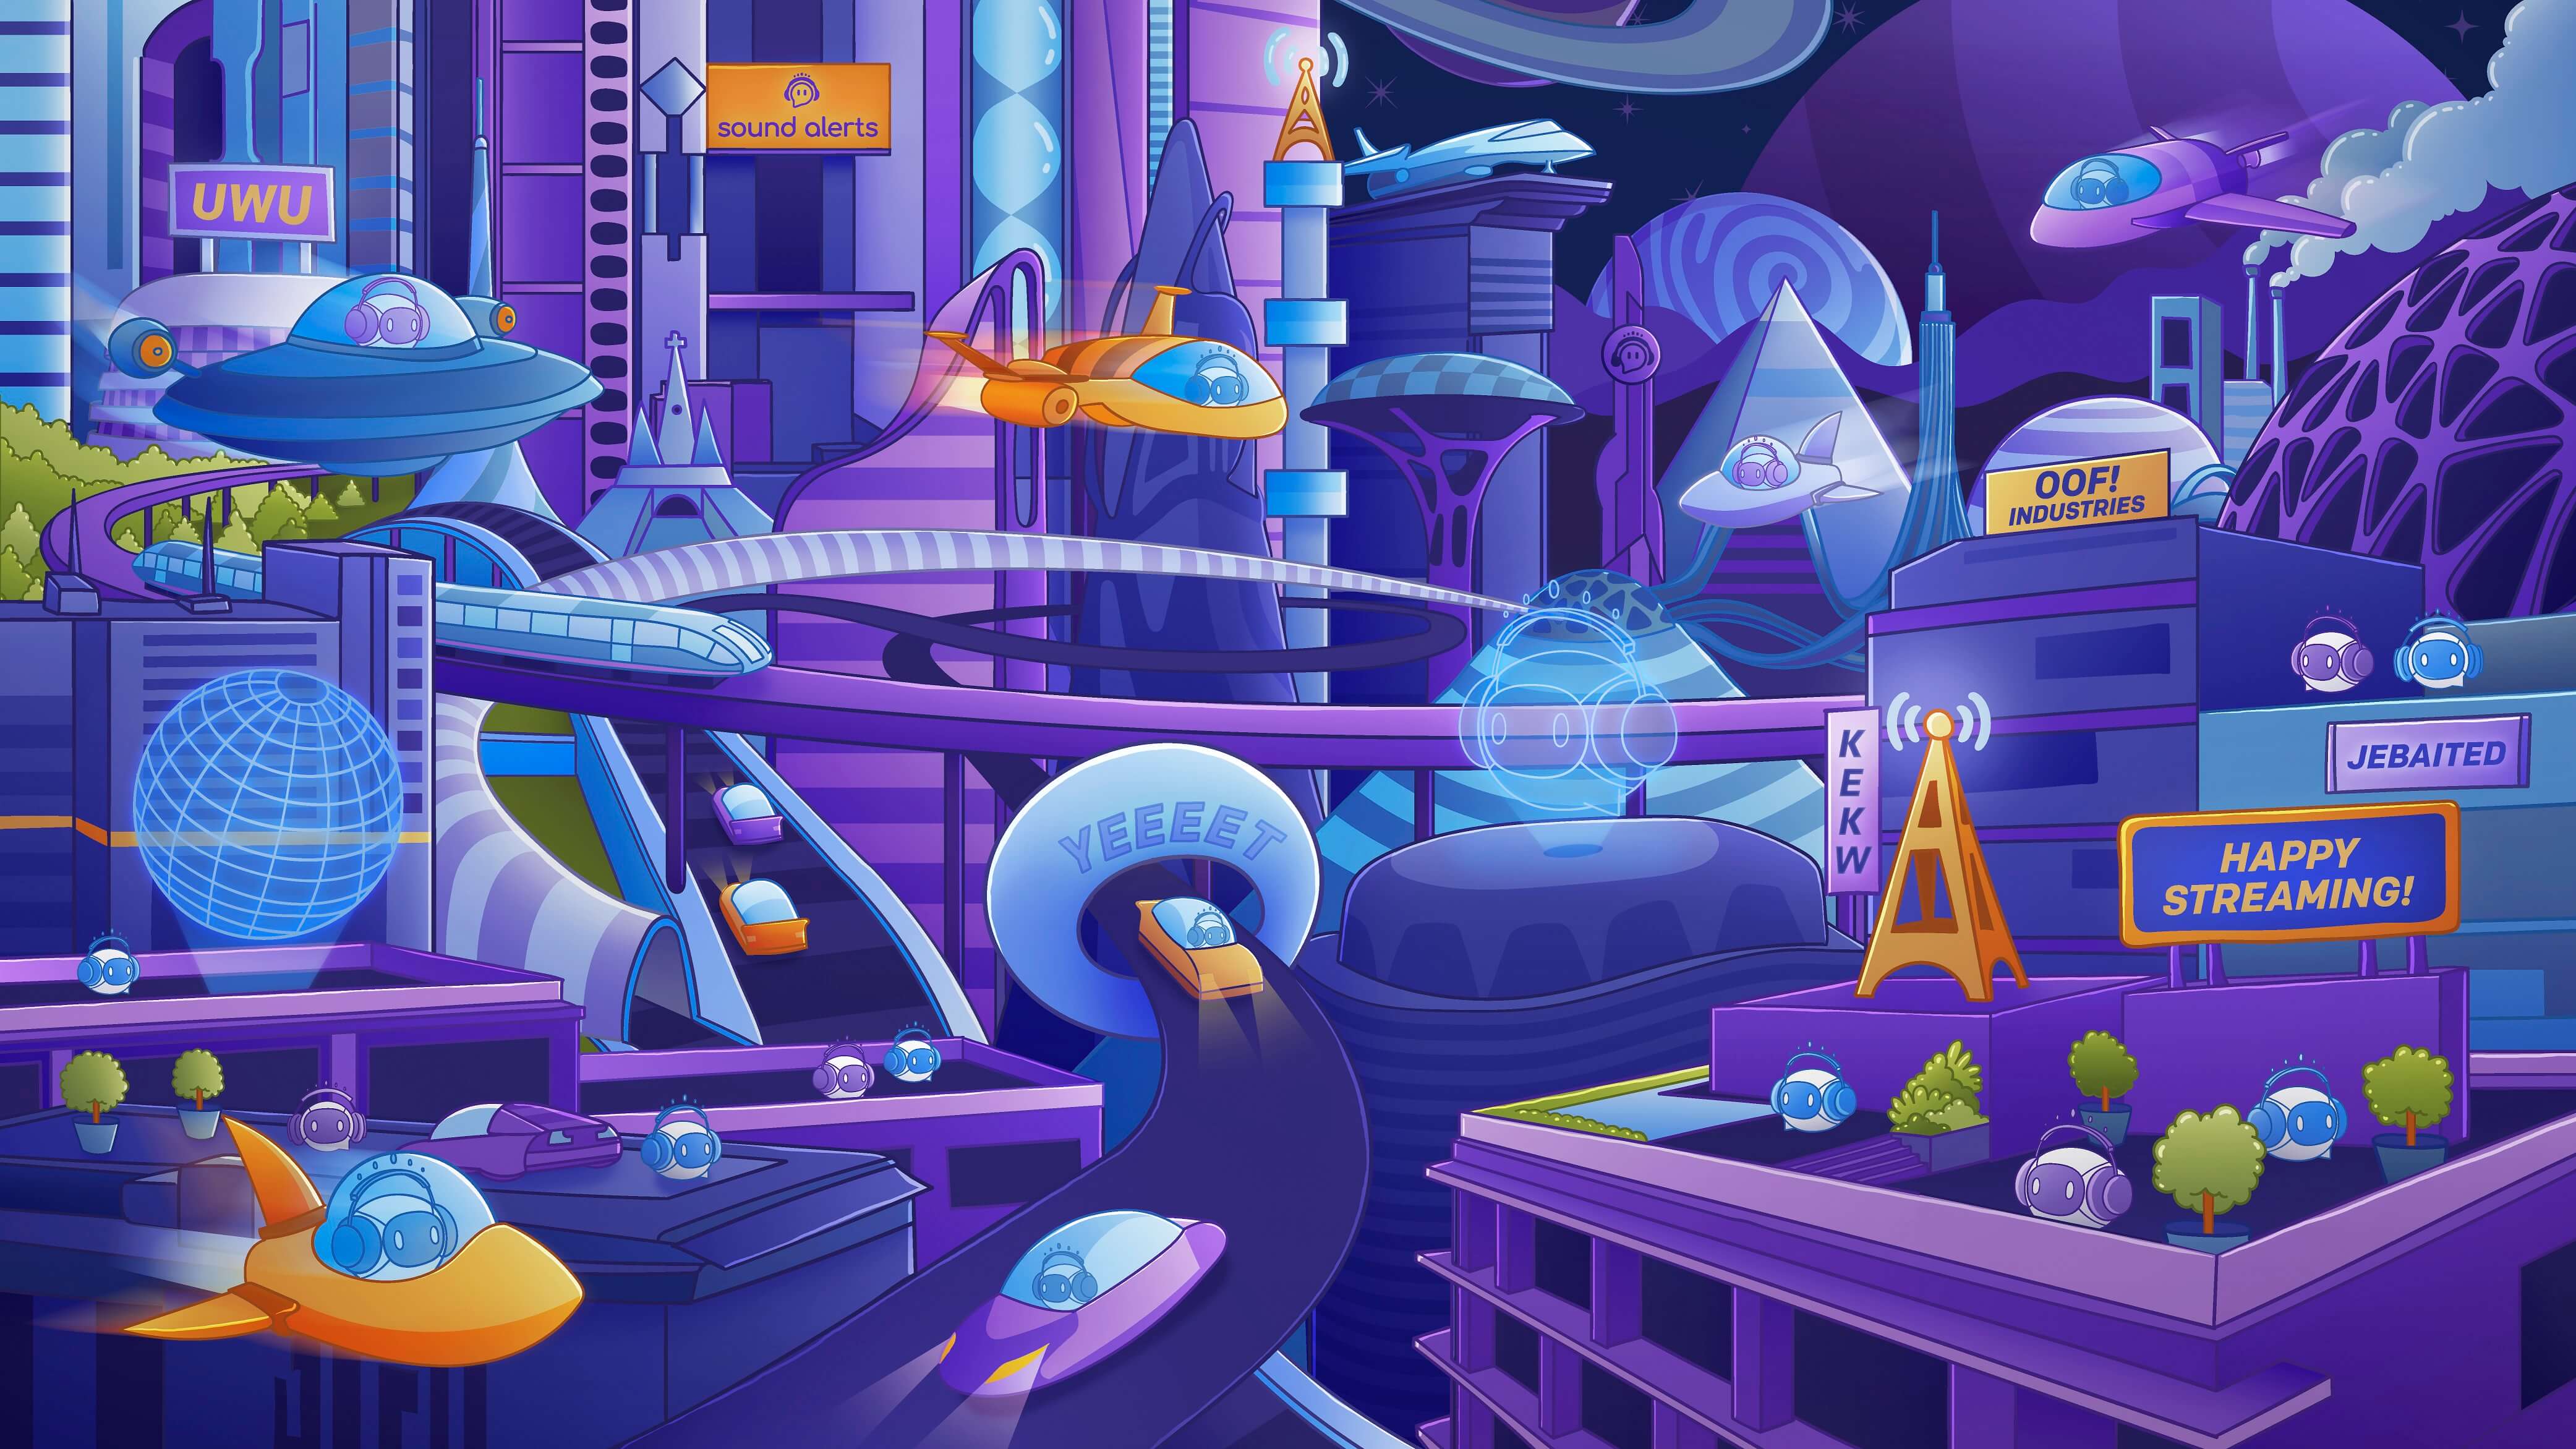 This image shows a concept art for a city centered in the Sound Alerts universe.